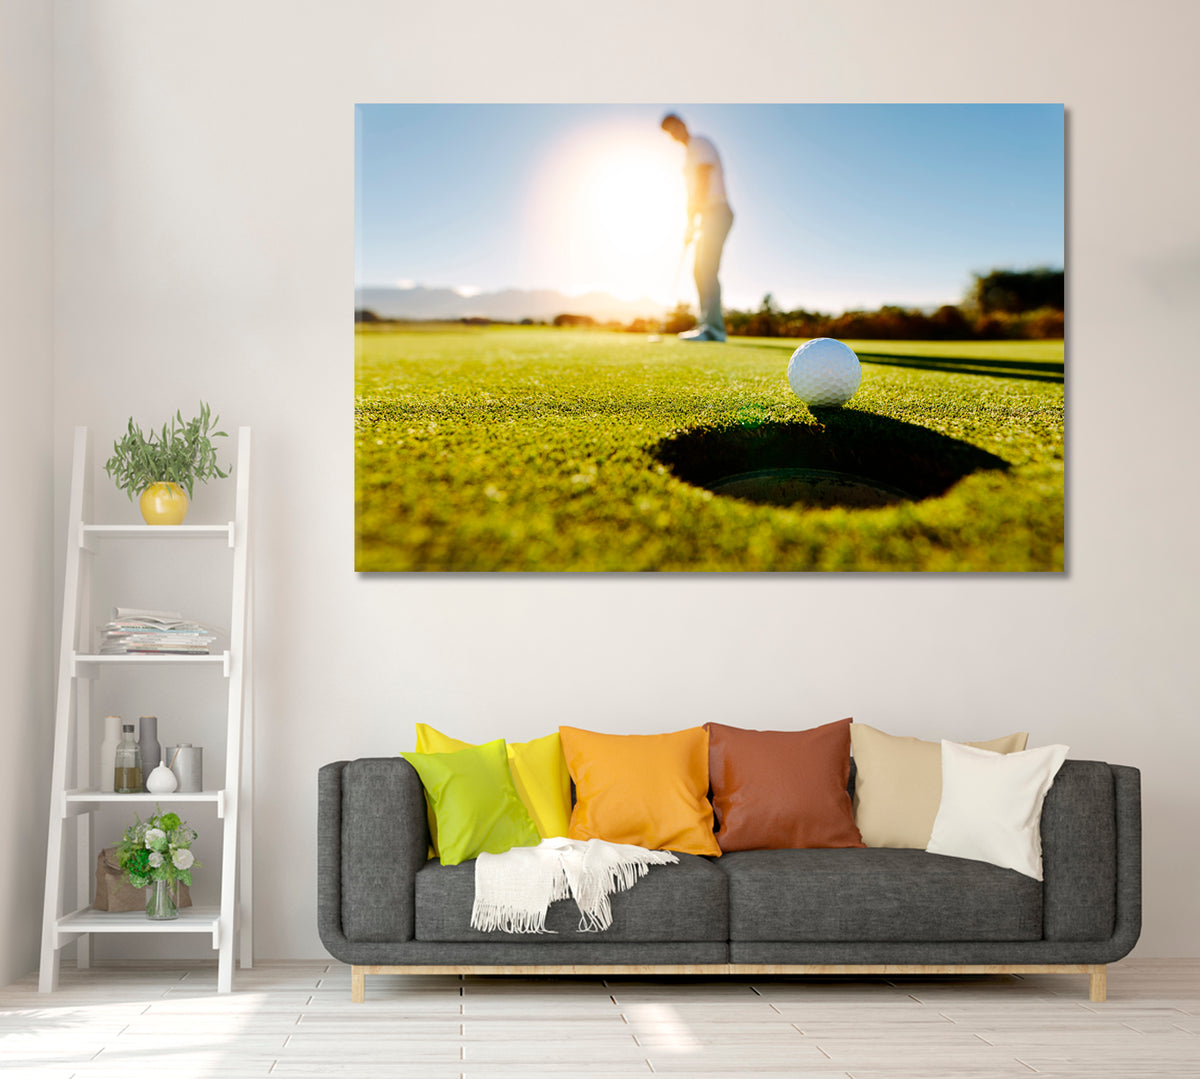 Golfer Putting Golf Ball Into Hole Canvas Print ArtLexy 1 Panel 24"x16" inches 